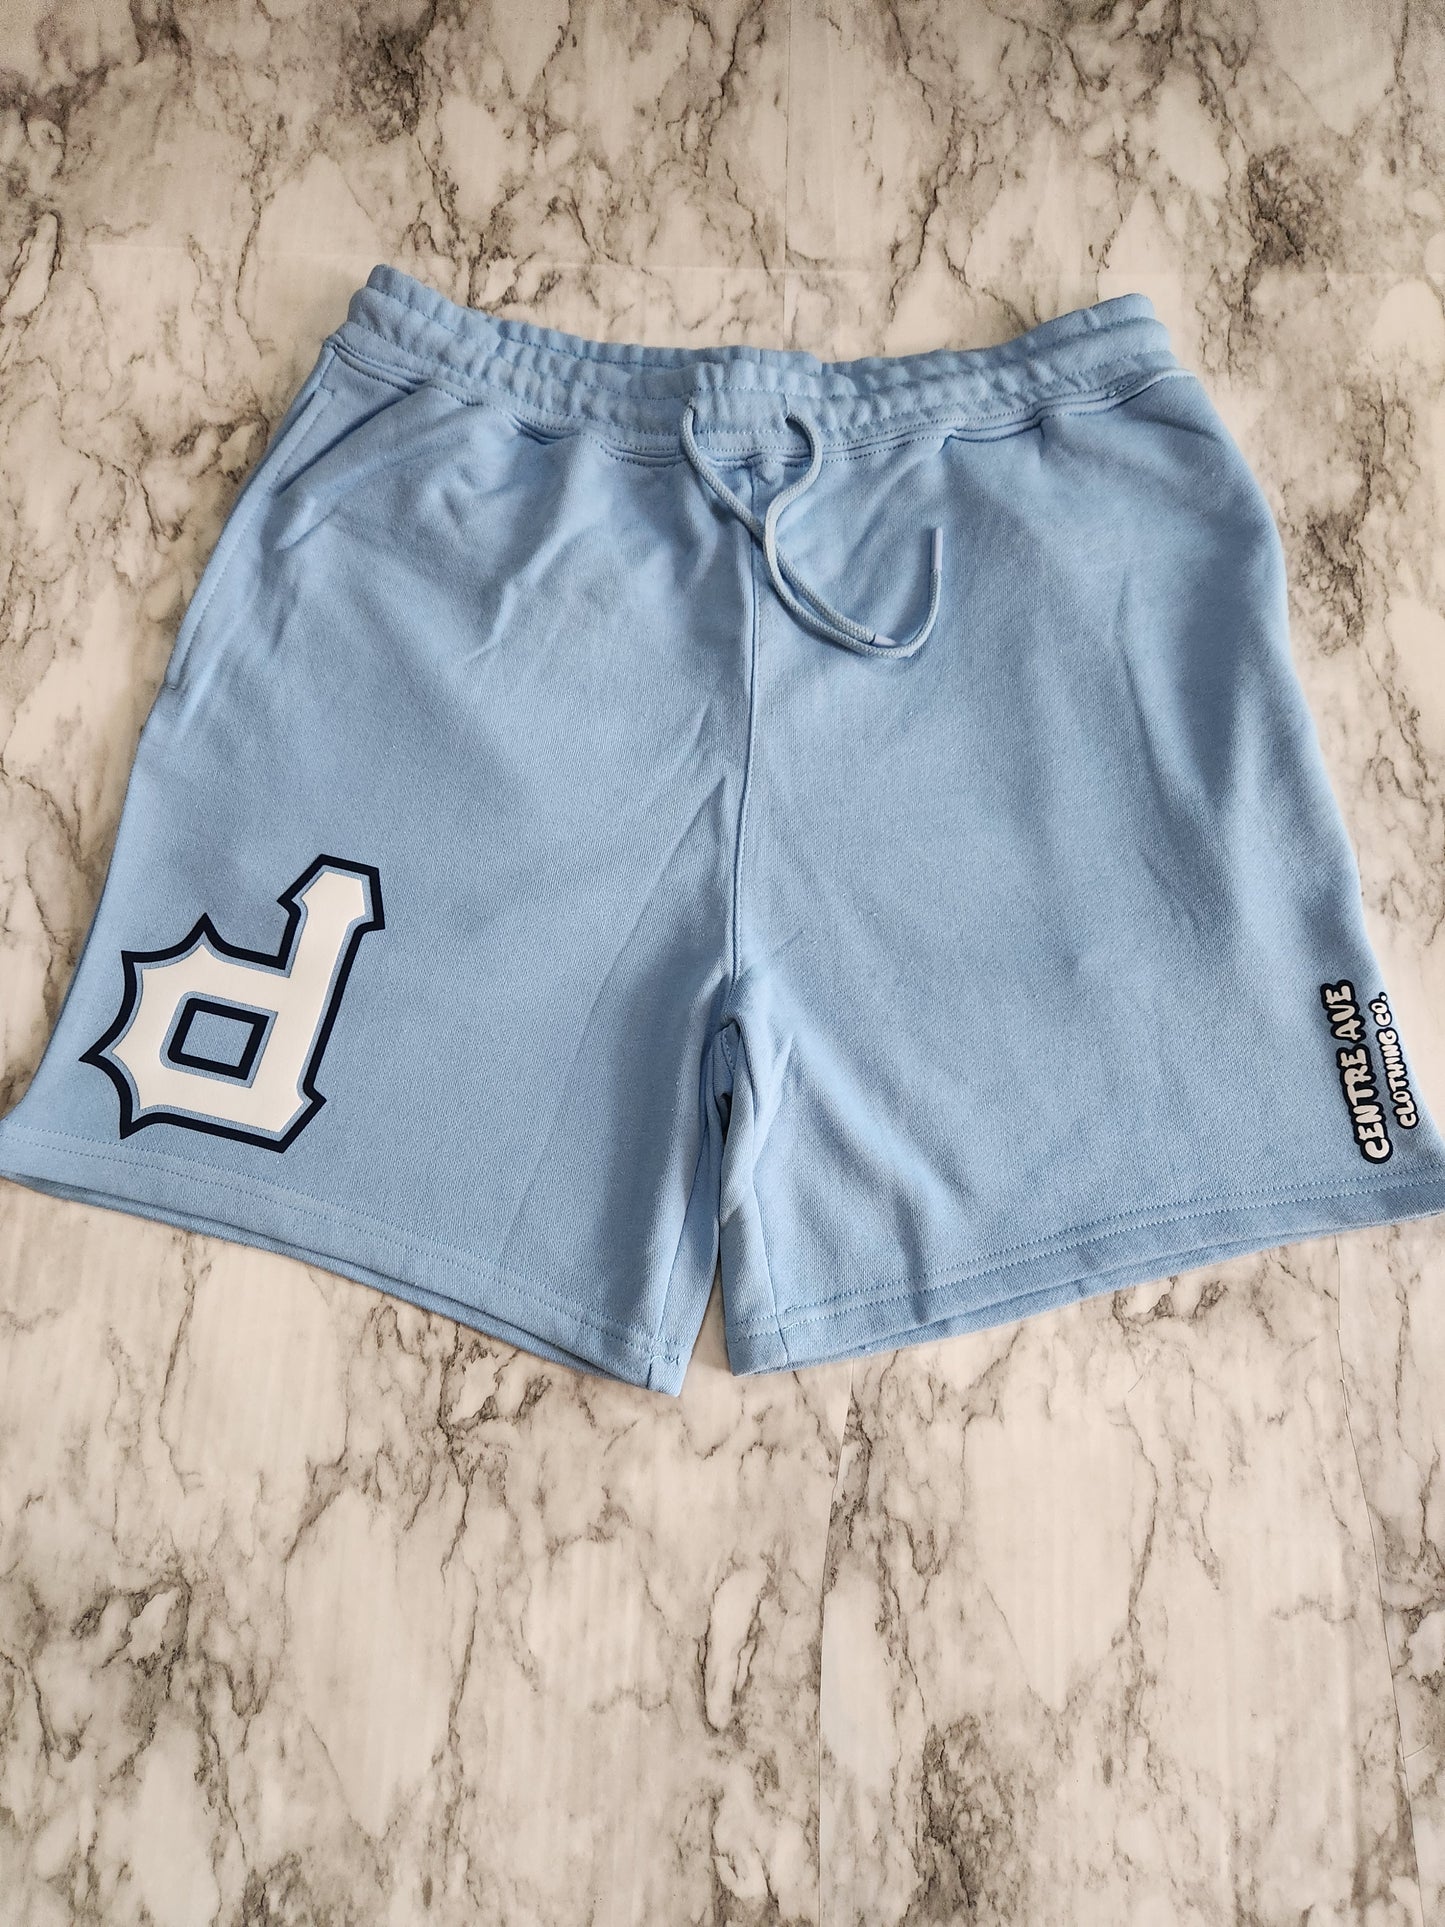 P Shorts - Centre Ave Clothing Co.